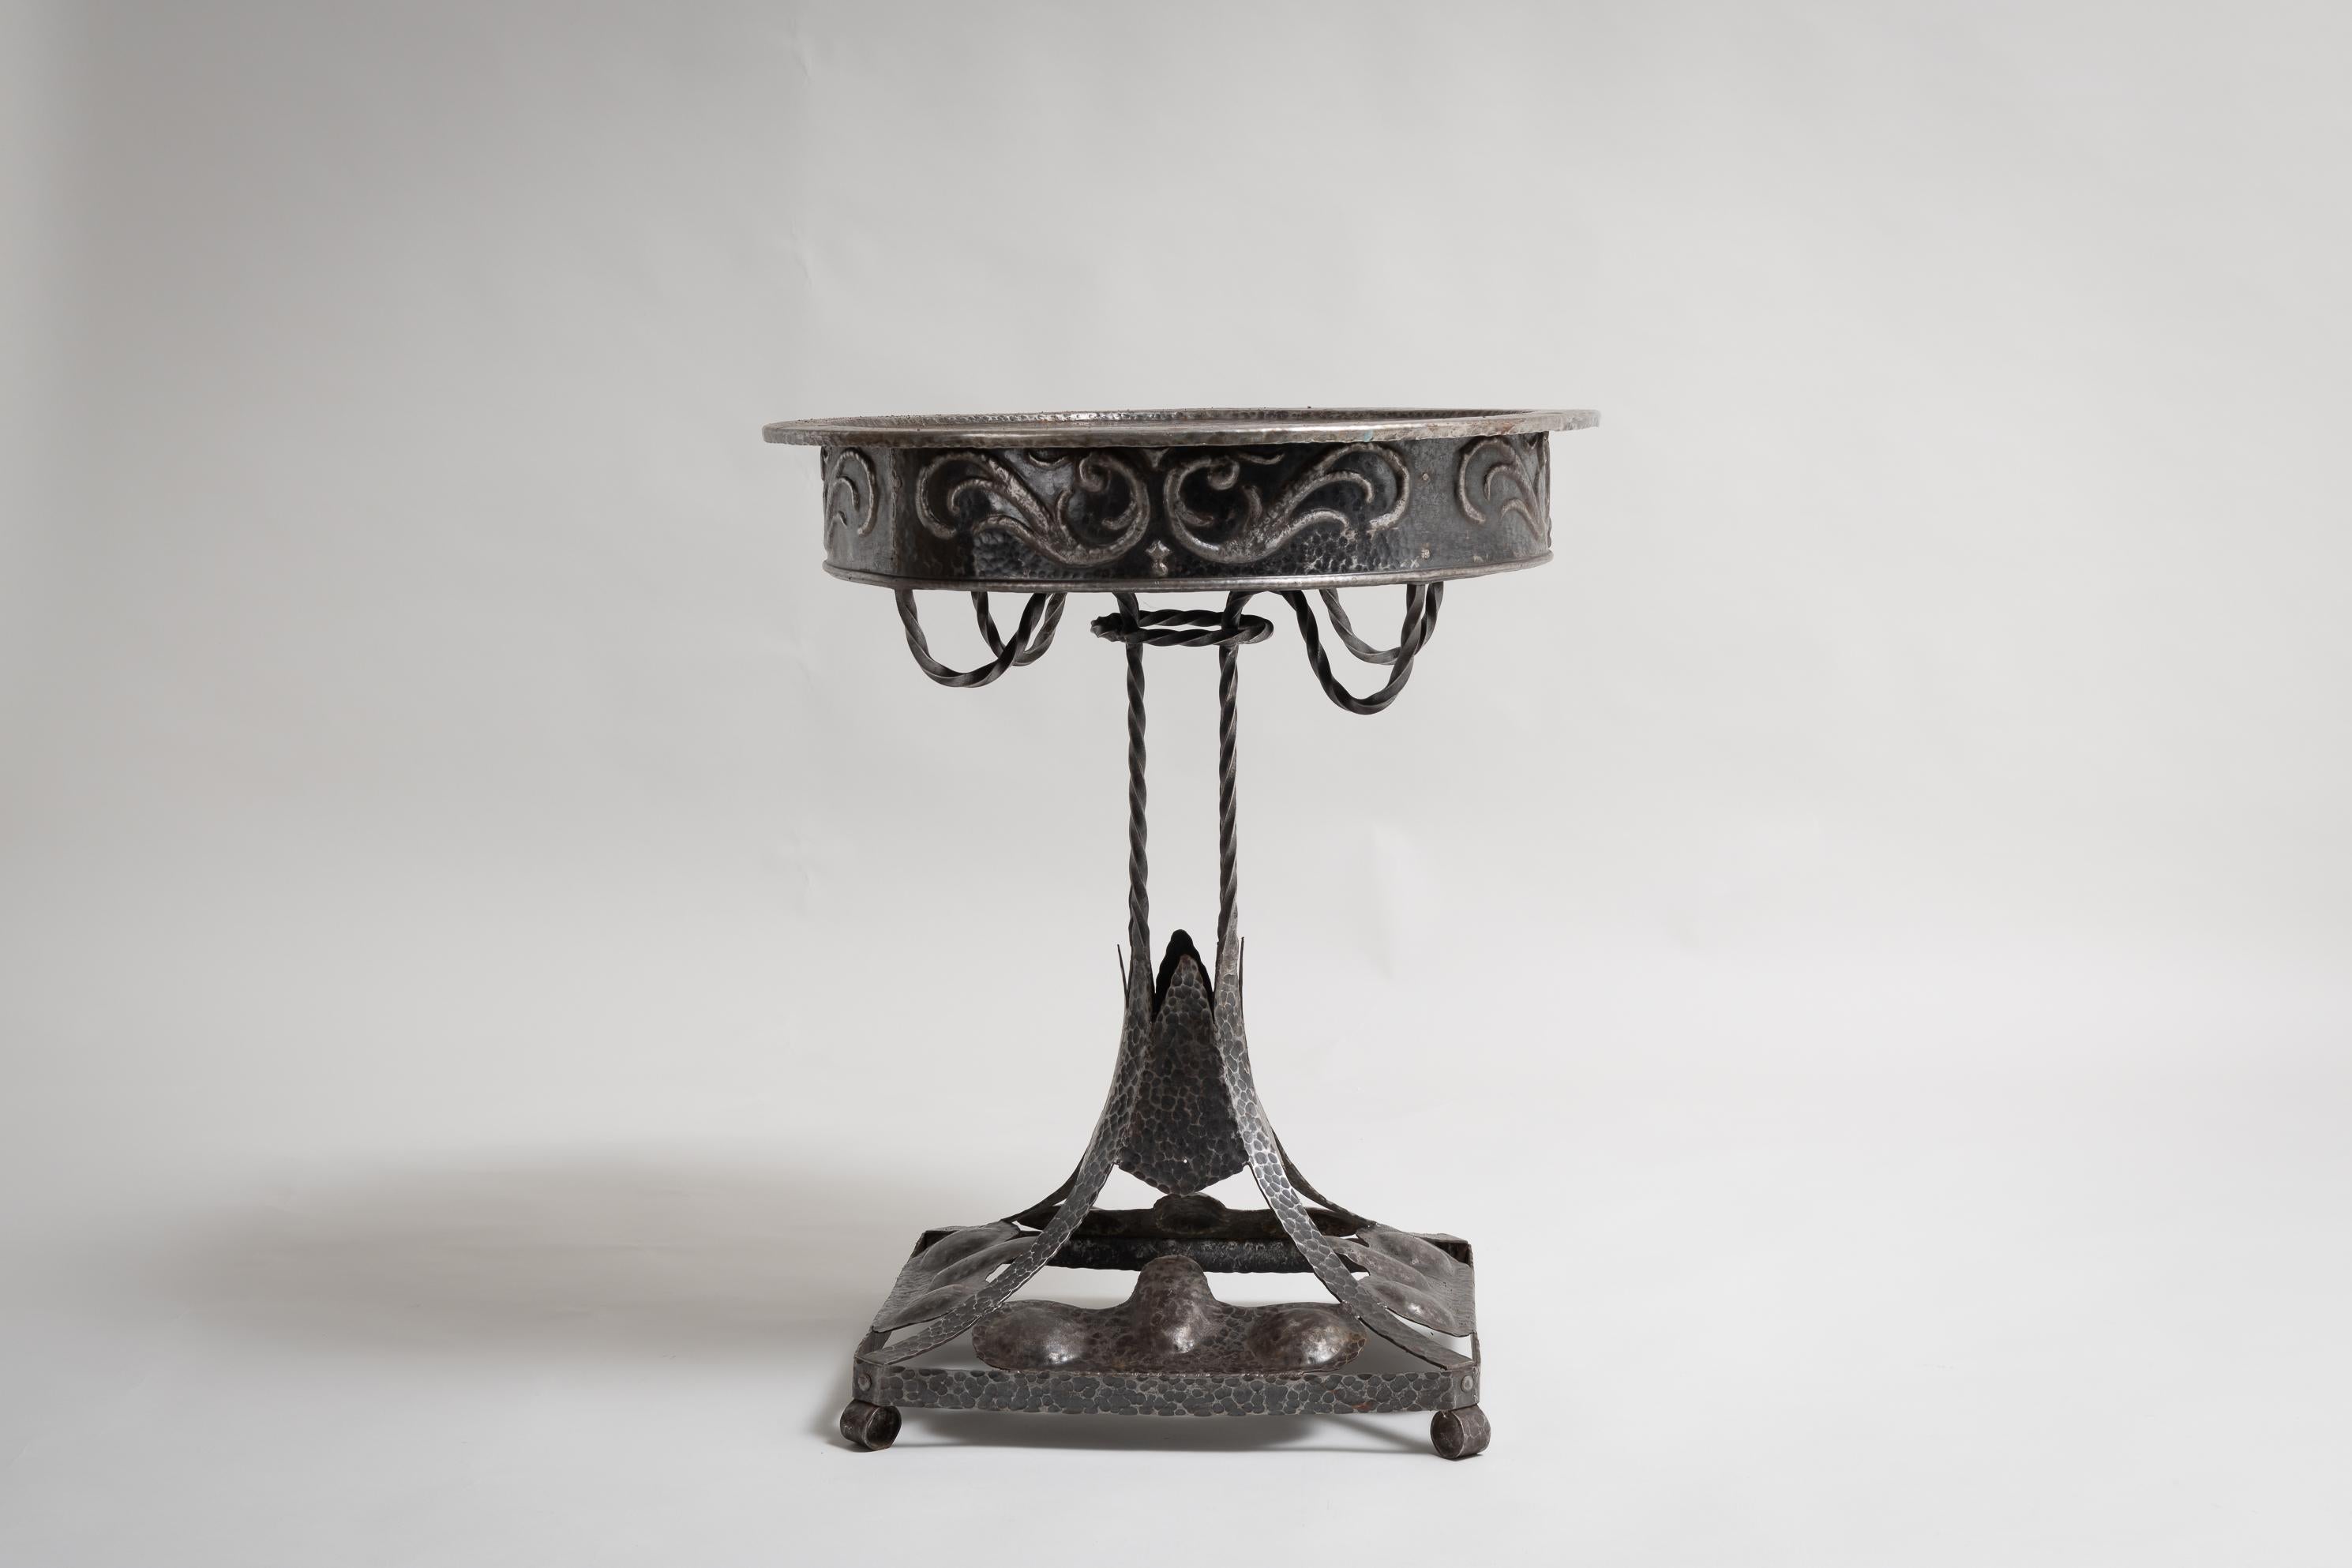 Swedish table in art nouveau style from circa 1920. The table is one of a kind and completely hand made from natural occurring iron. The table has marks from the hammer when the table was shaped which have become a part of the surface structure. Not